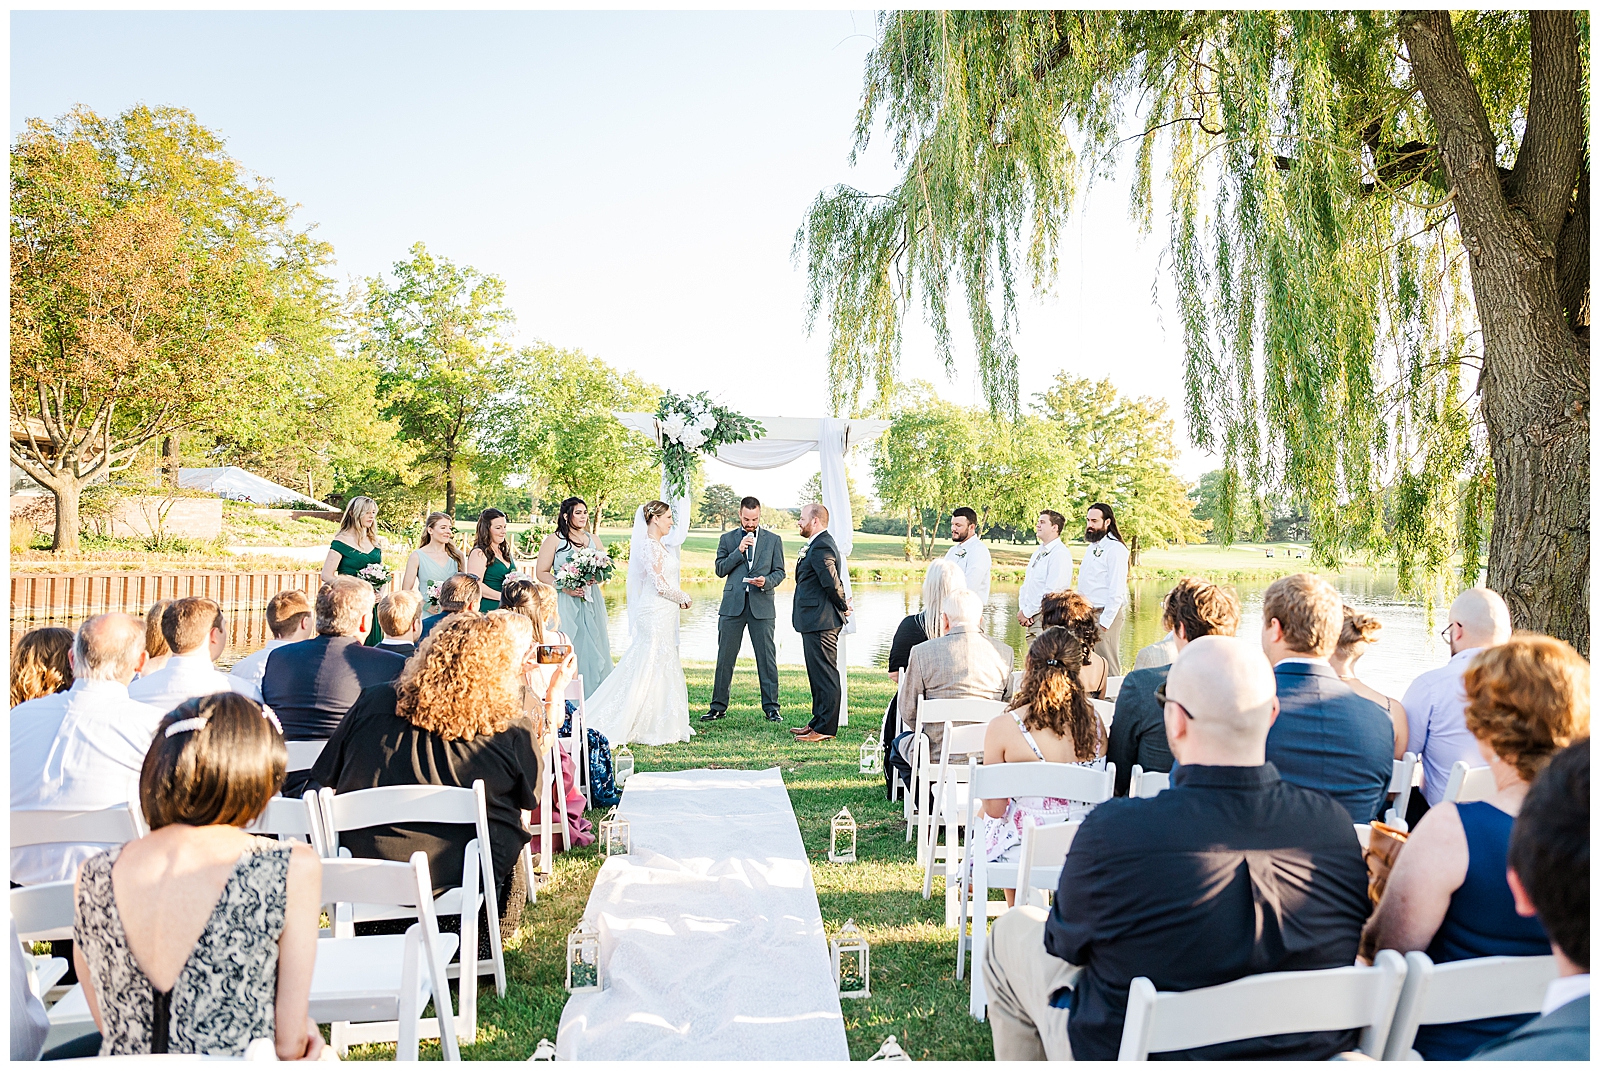 Sunset ceremony at Kemper Lakes Golf Course